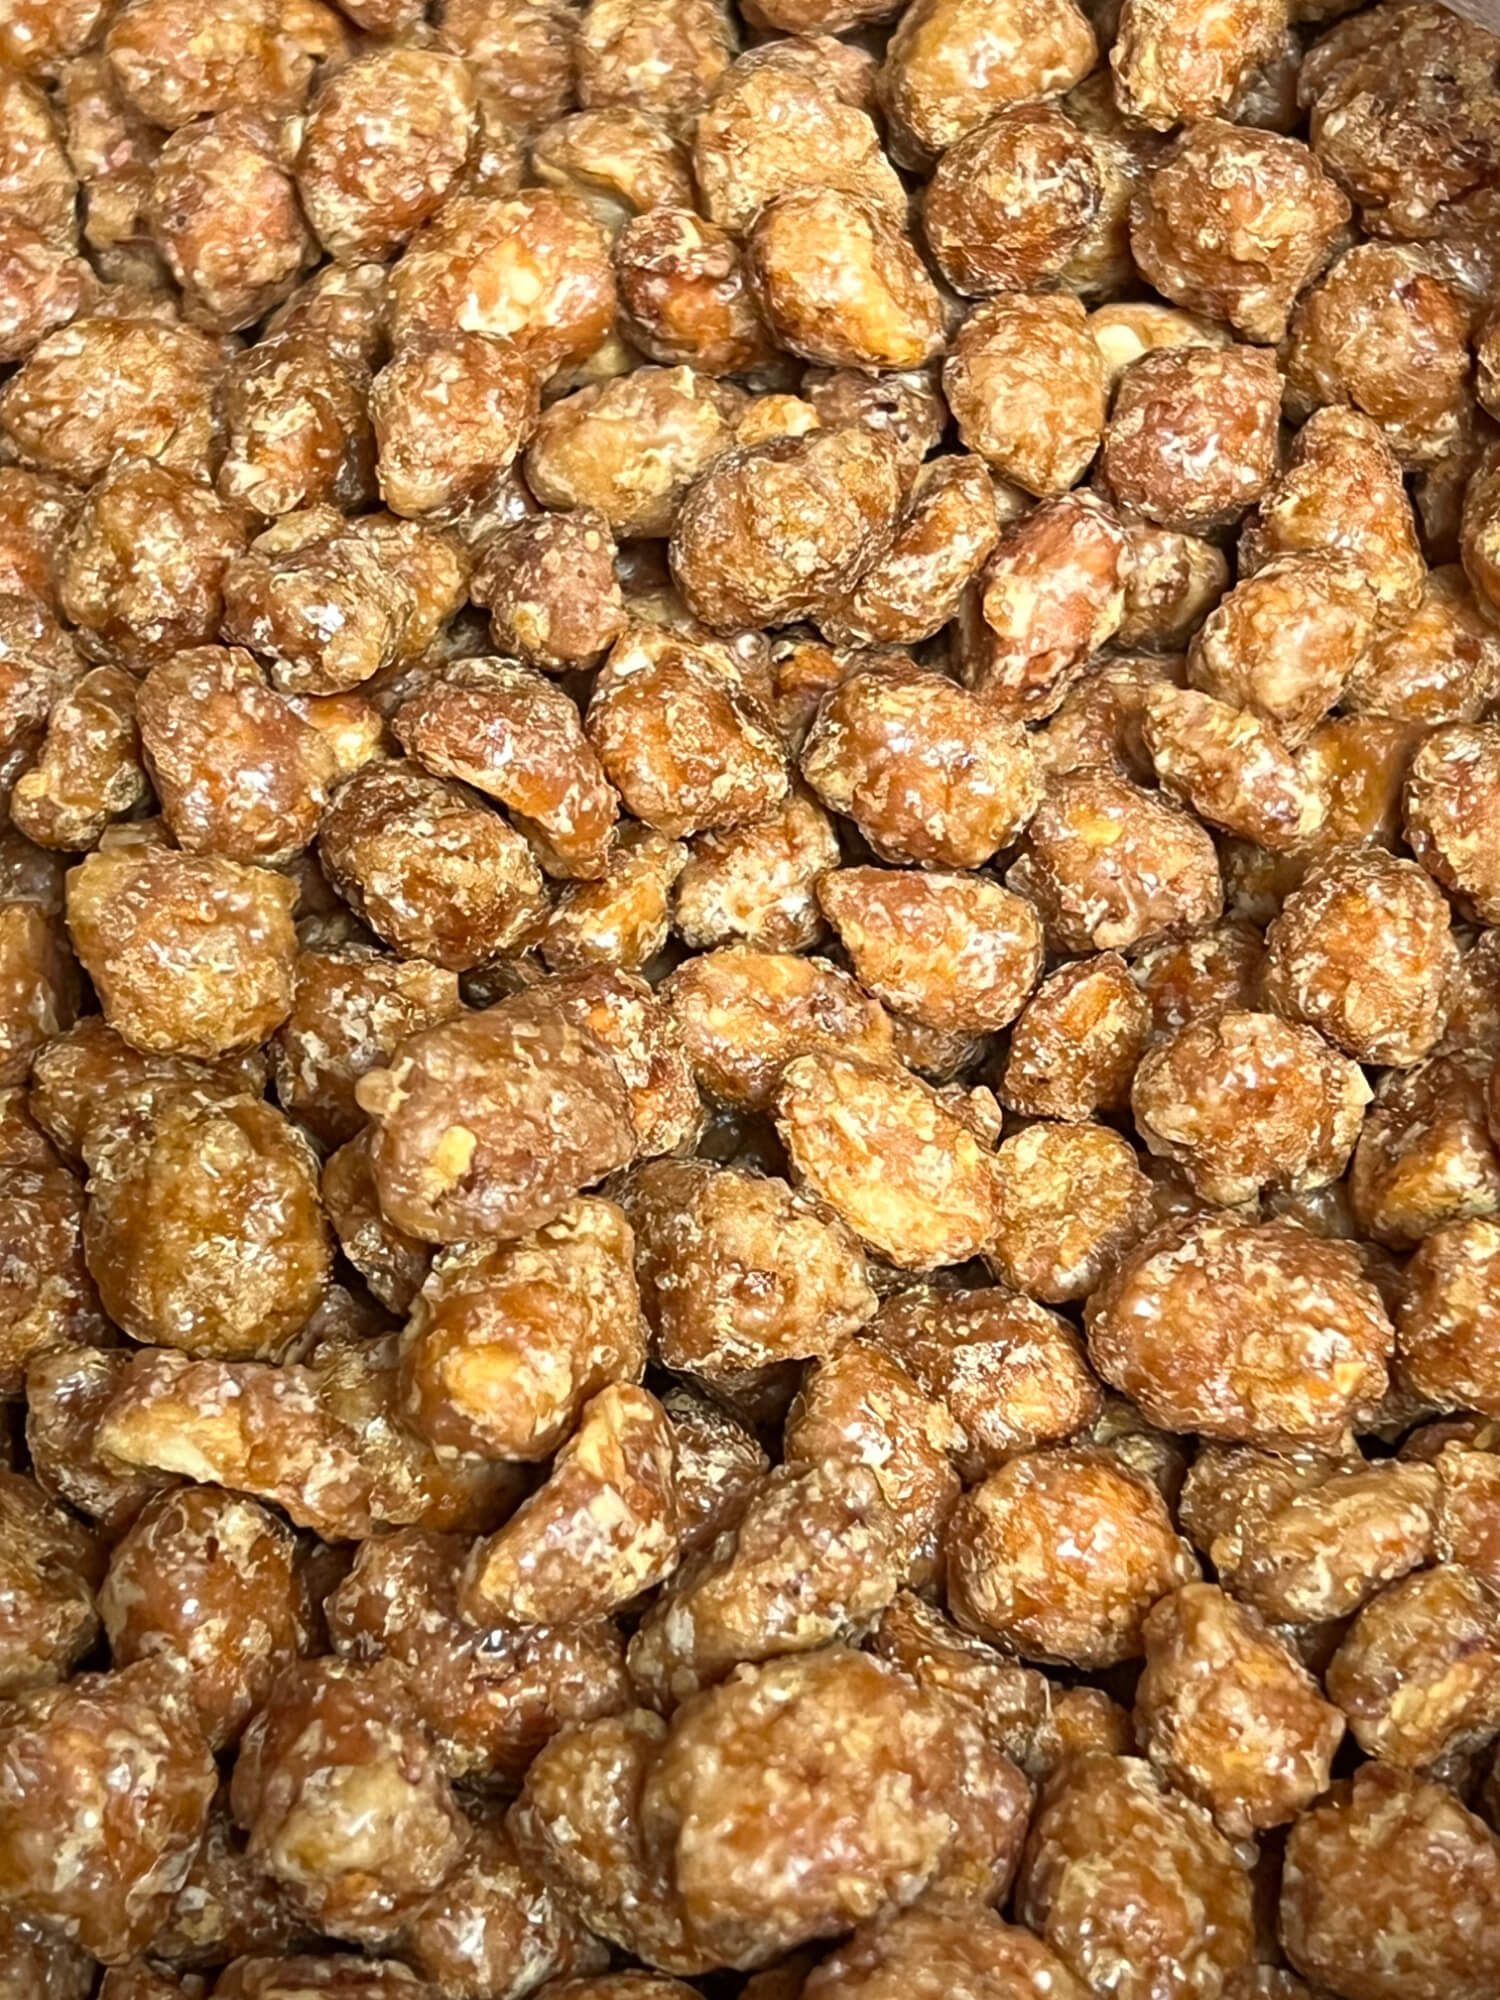 A close up of a pile of caramelized peanuts.